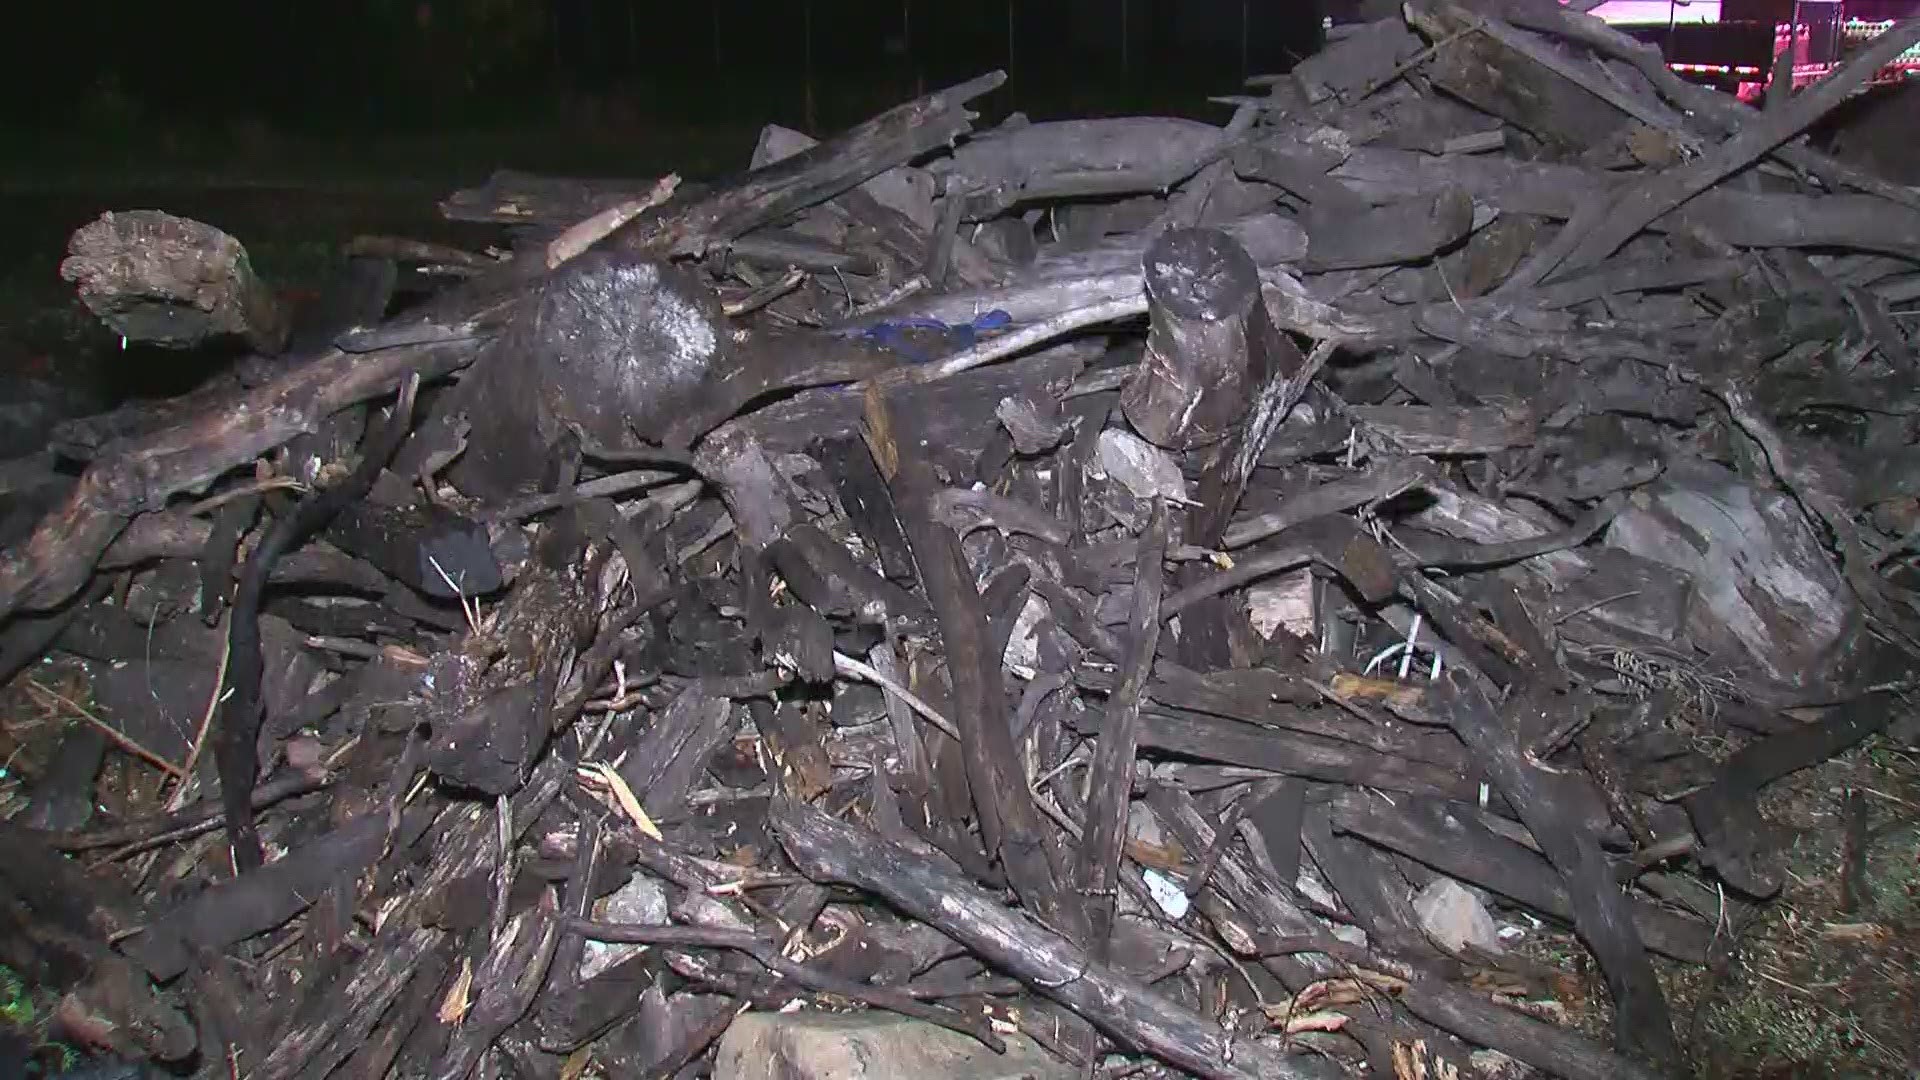 This video shows the aftermath of a blaze in a large pile of tree limbs.